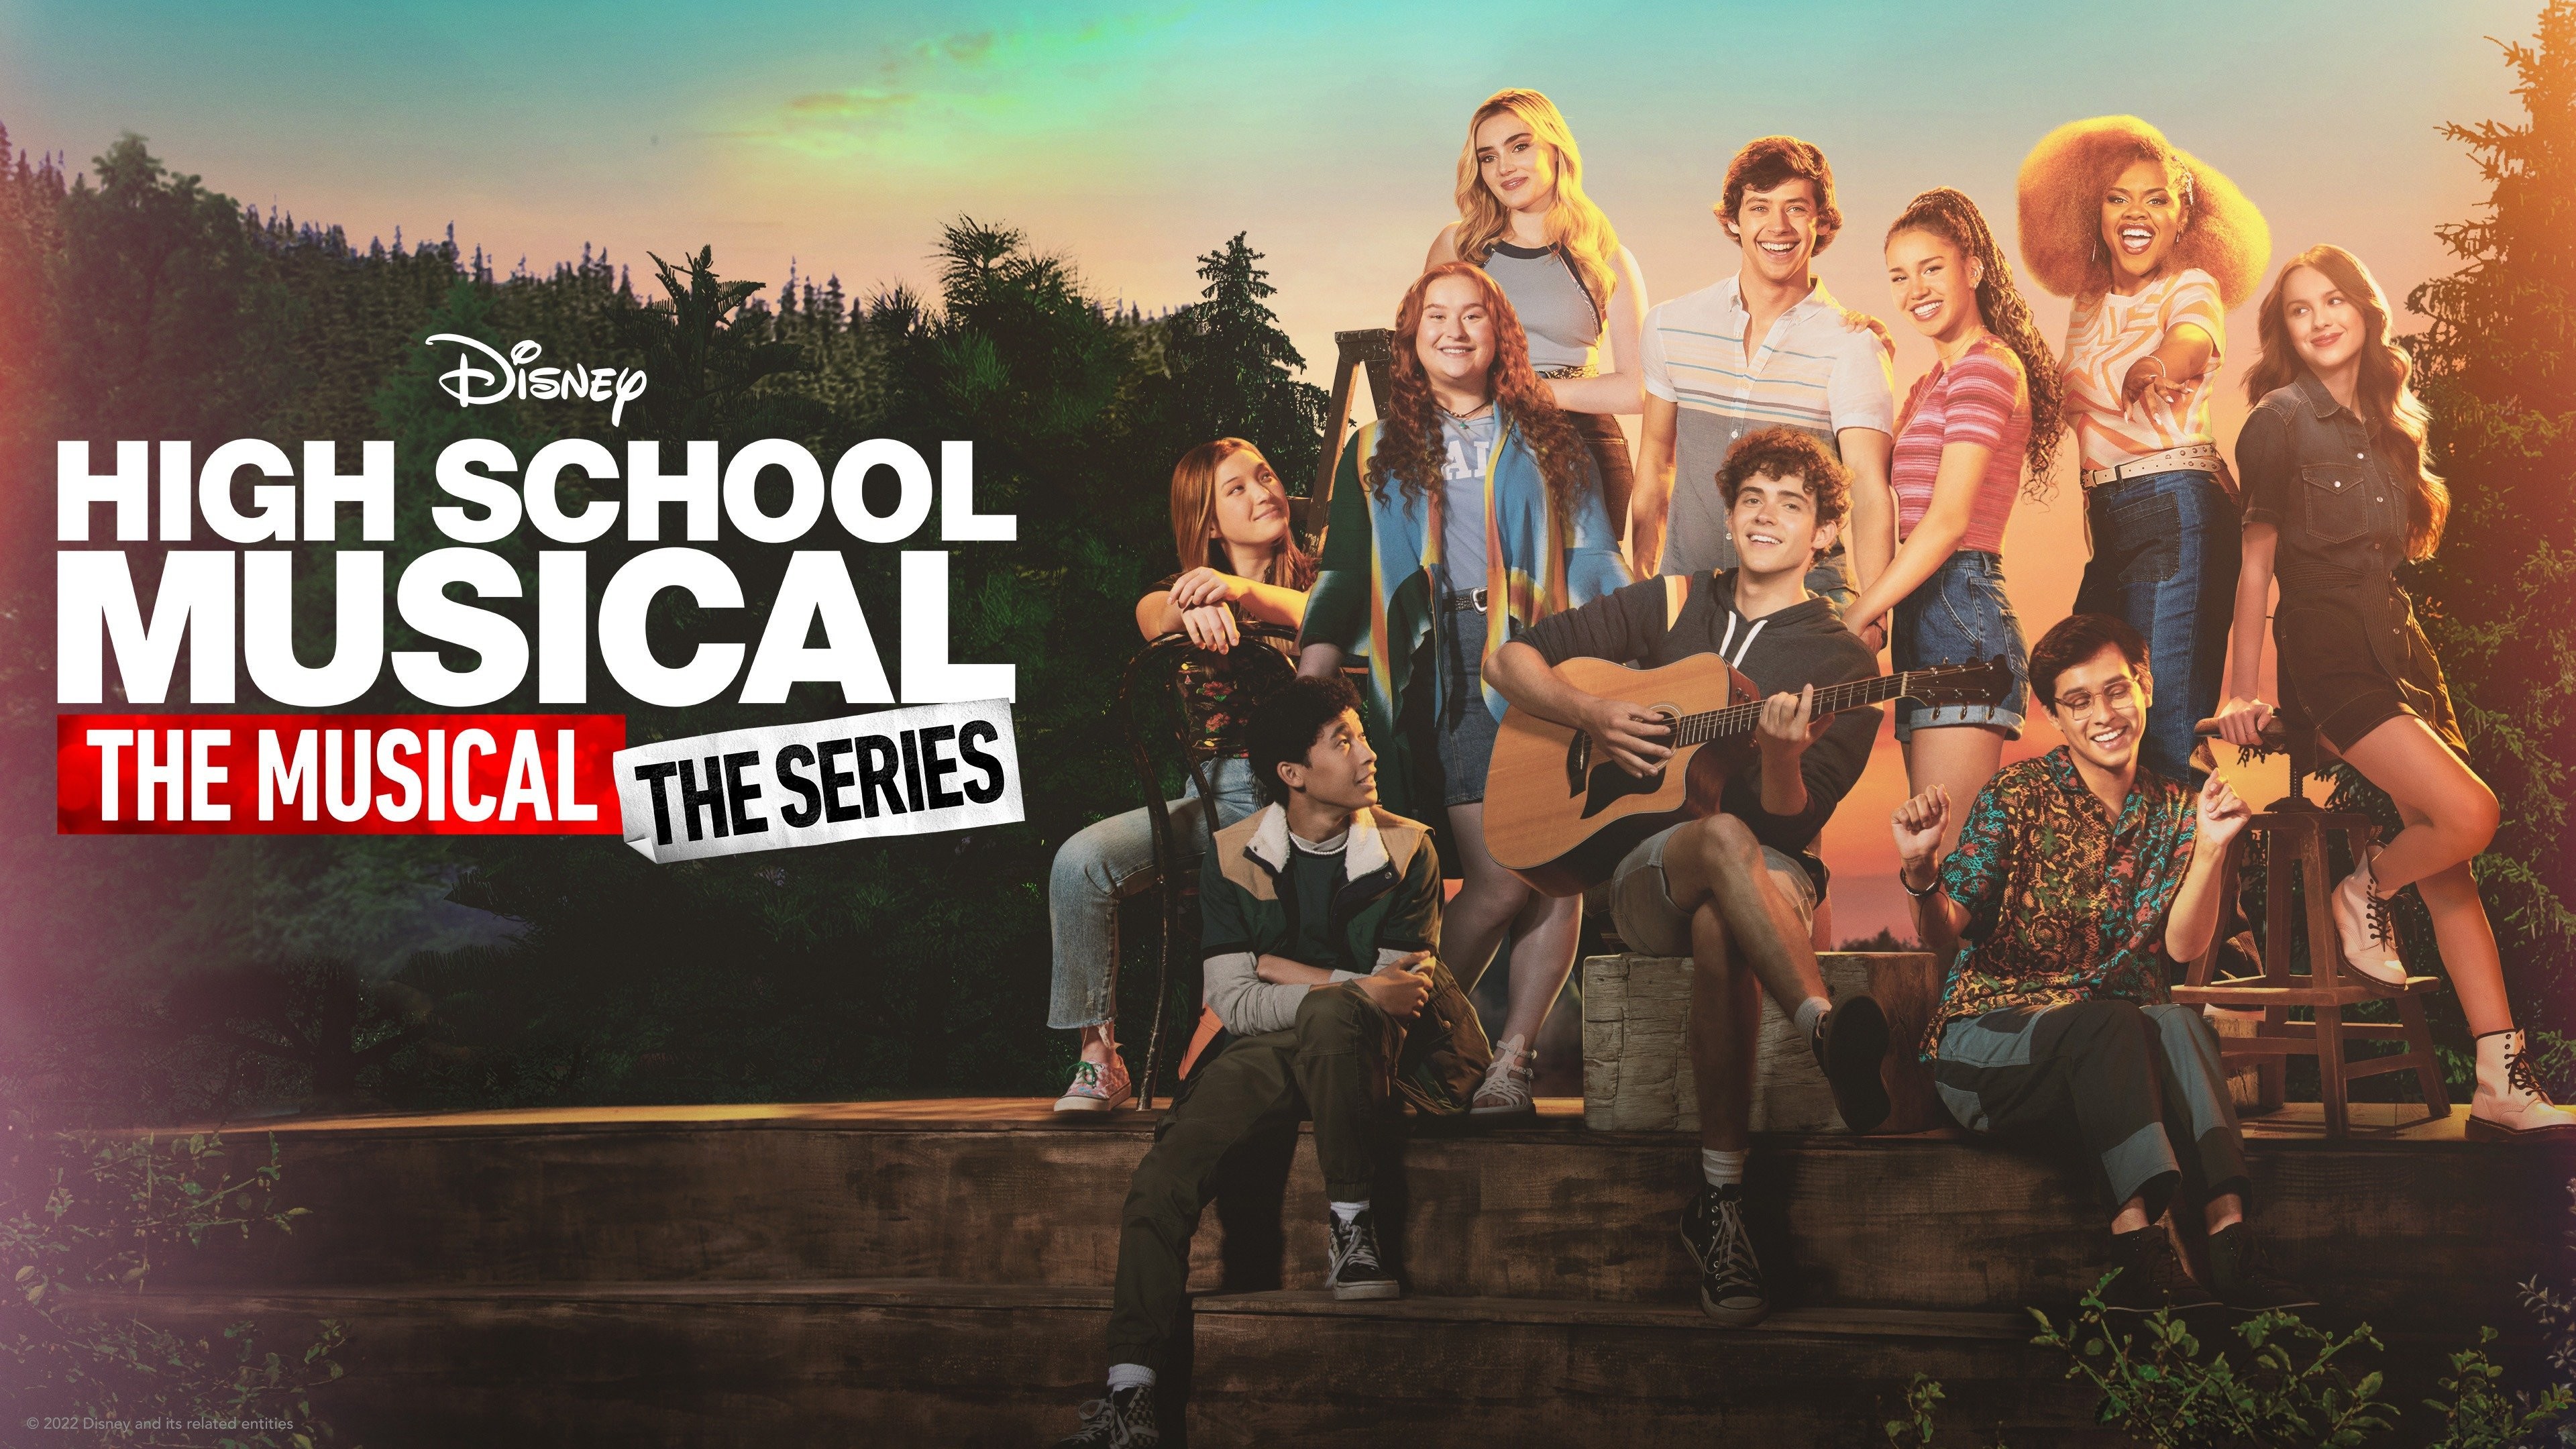 | Musical: Season School High 3 Series Rotten The Tomatoes The Musical: